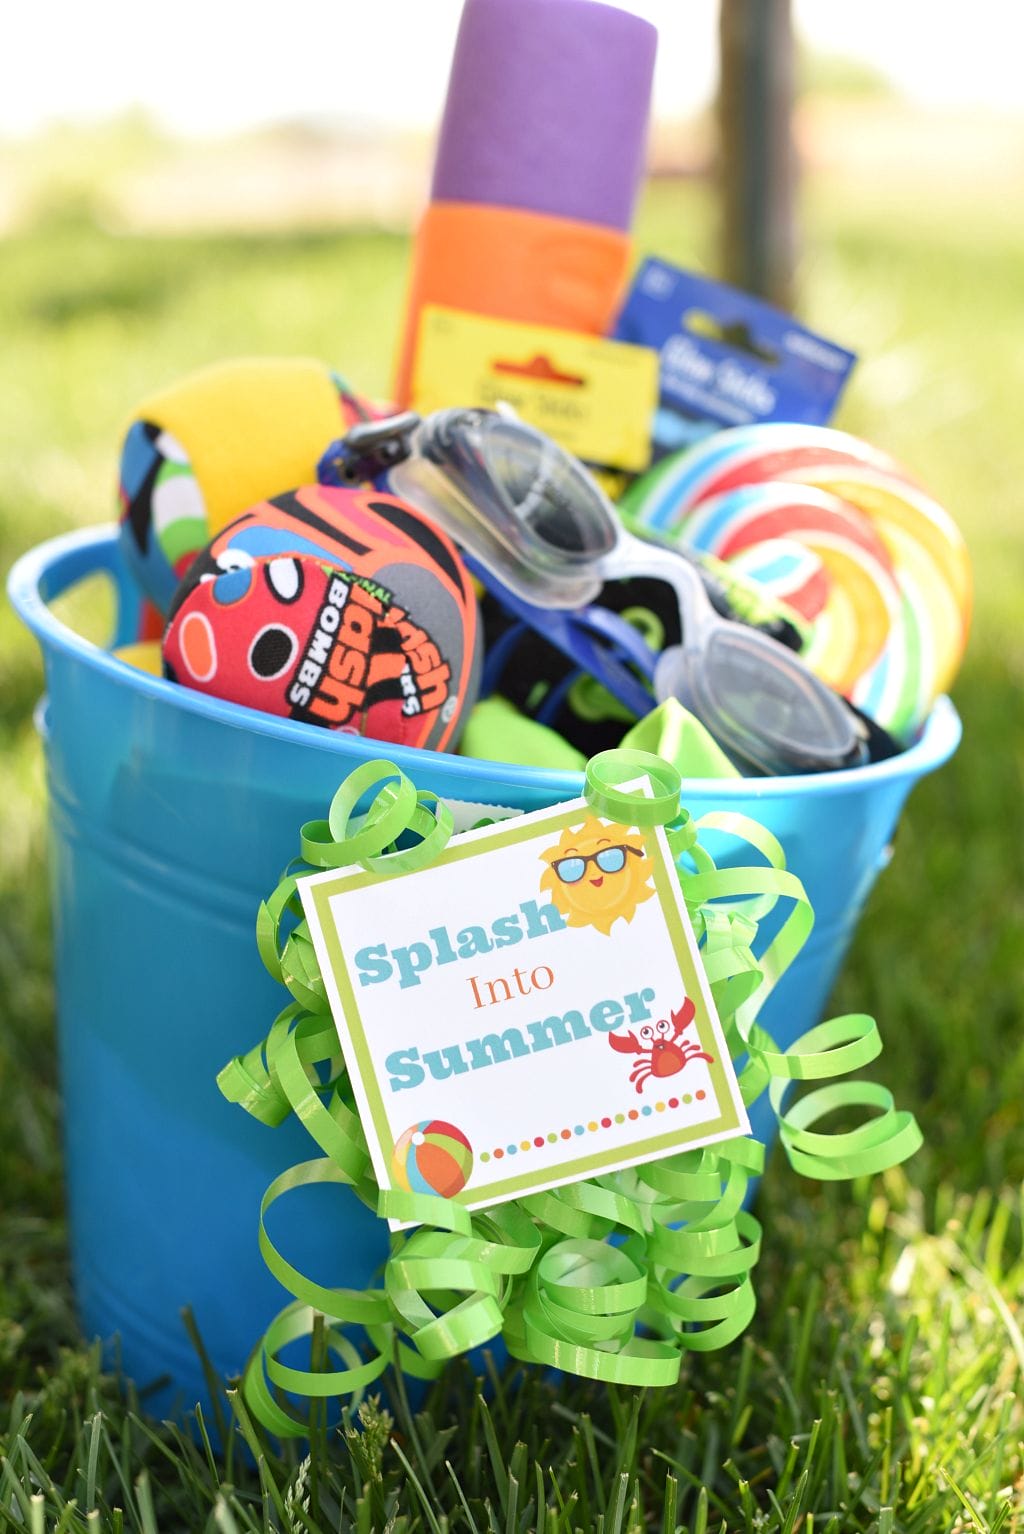 Sand bucket with water toys, goggles, and candy to make a gift.